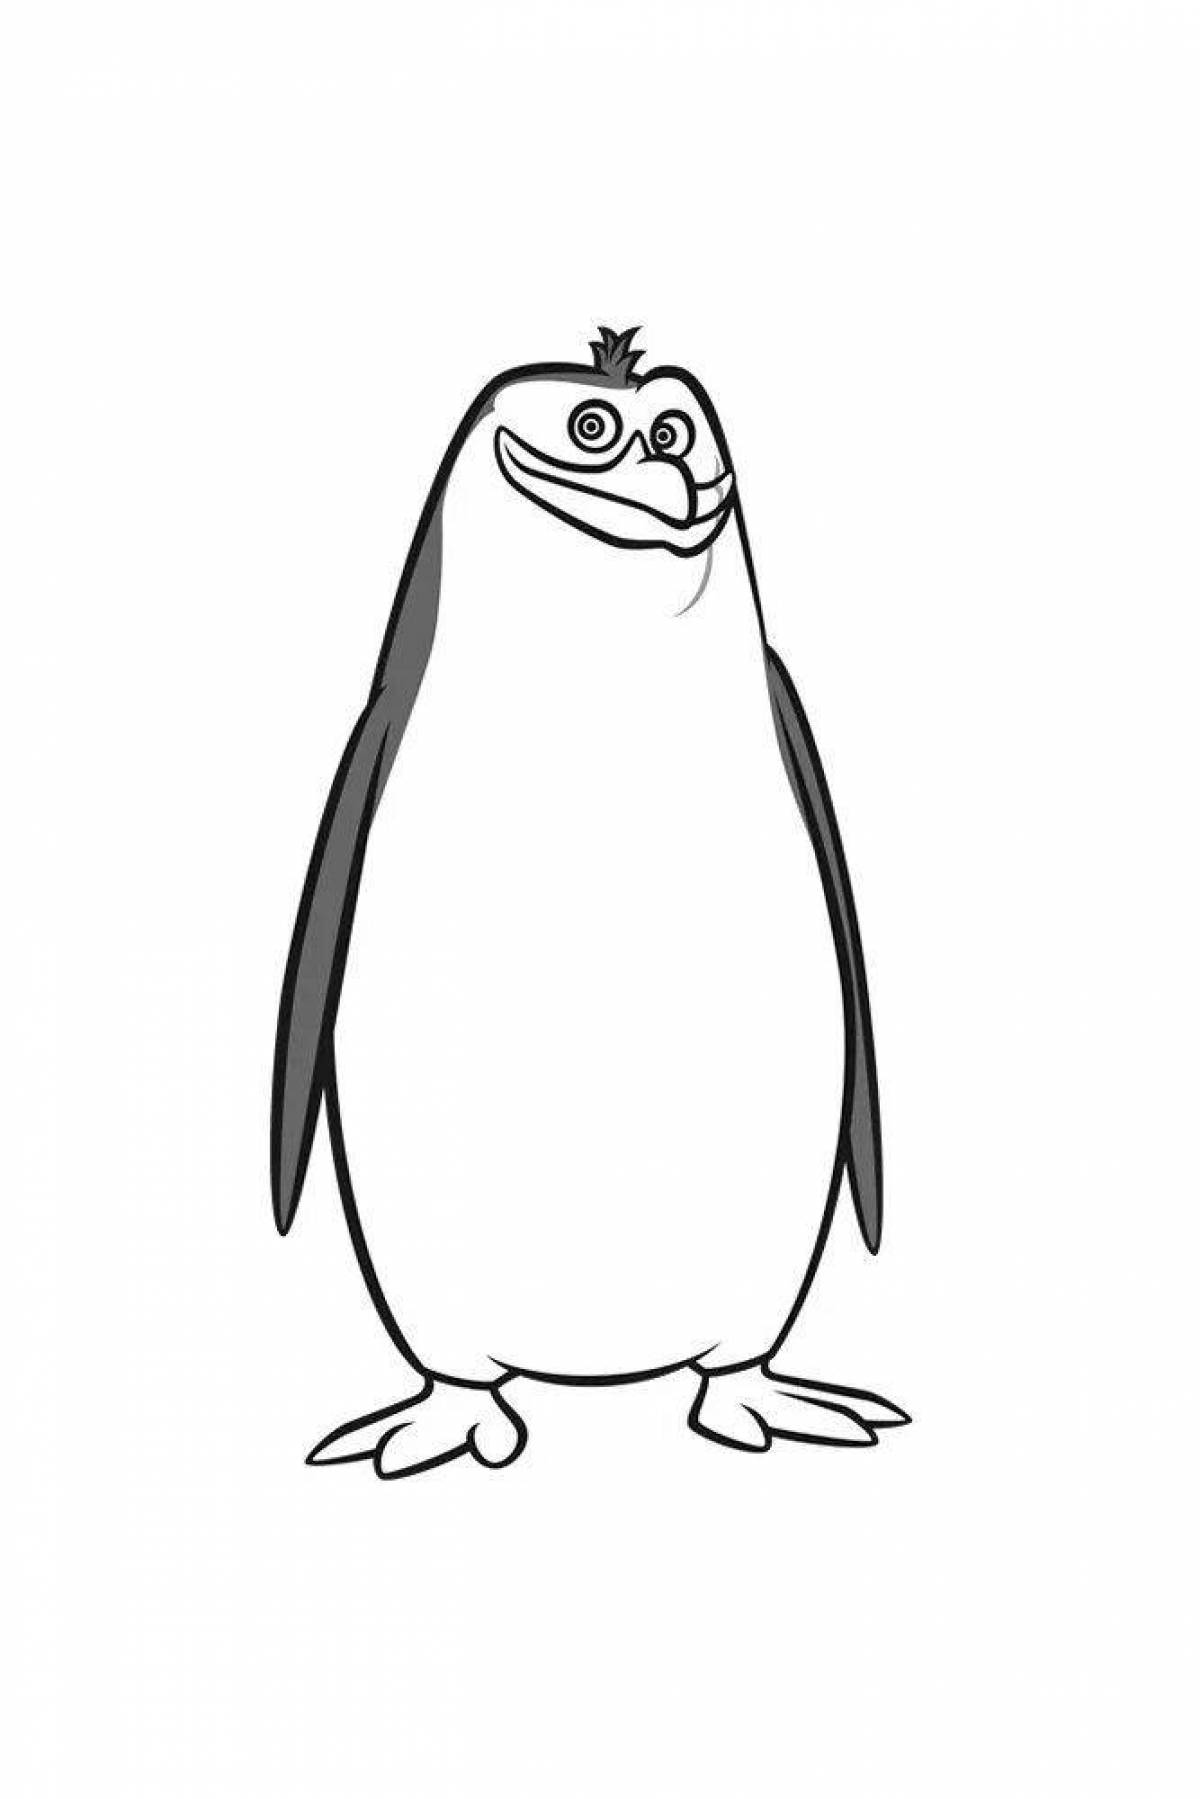 Cute penguins from madagascar